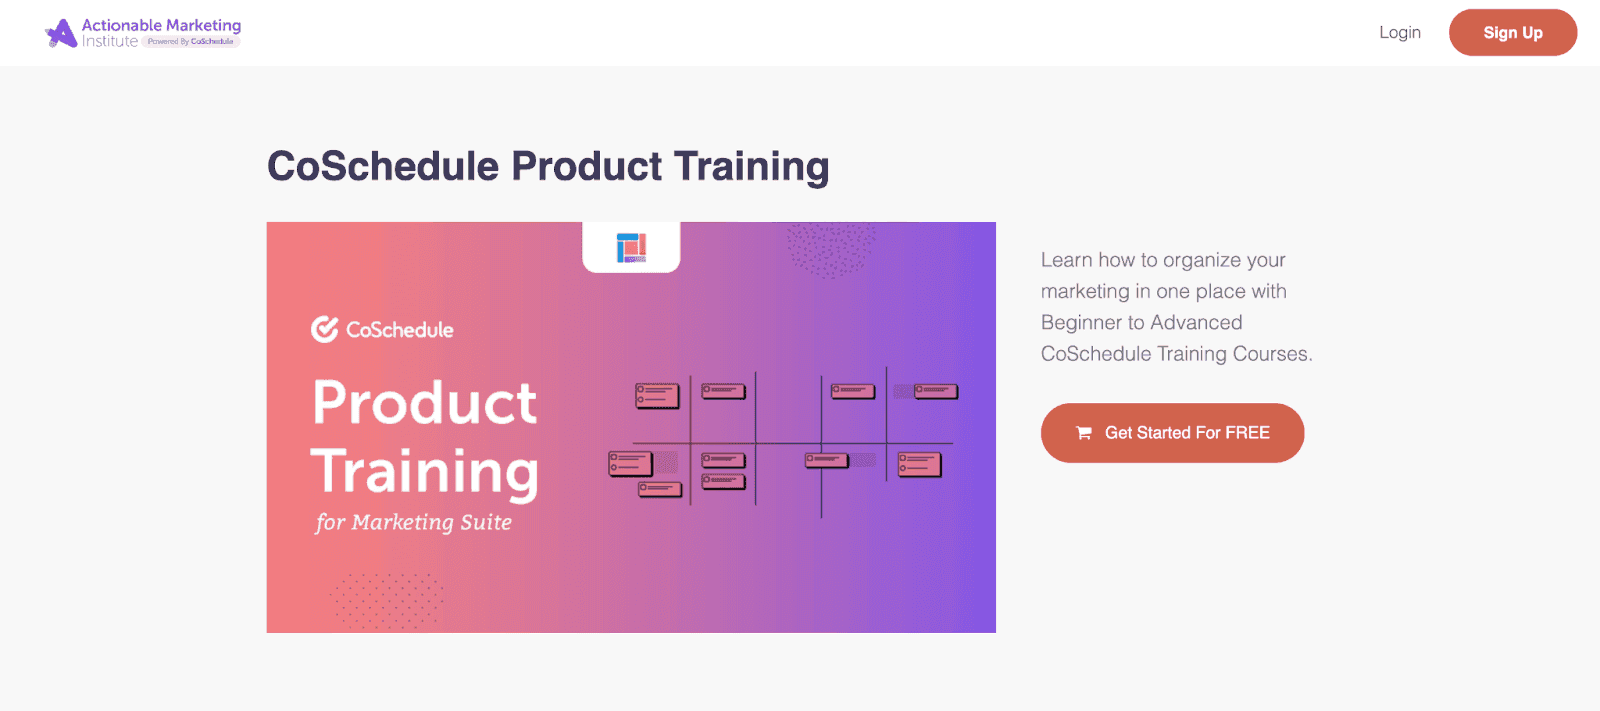 CoSchedules product training course for marketing suite